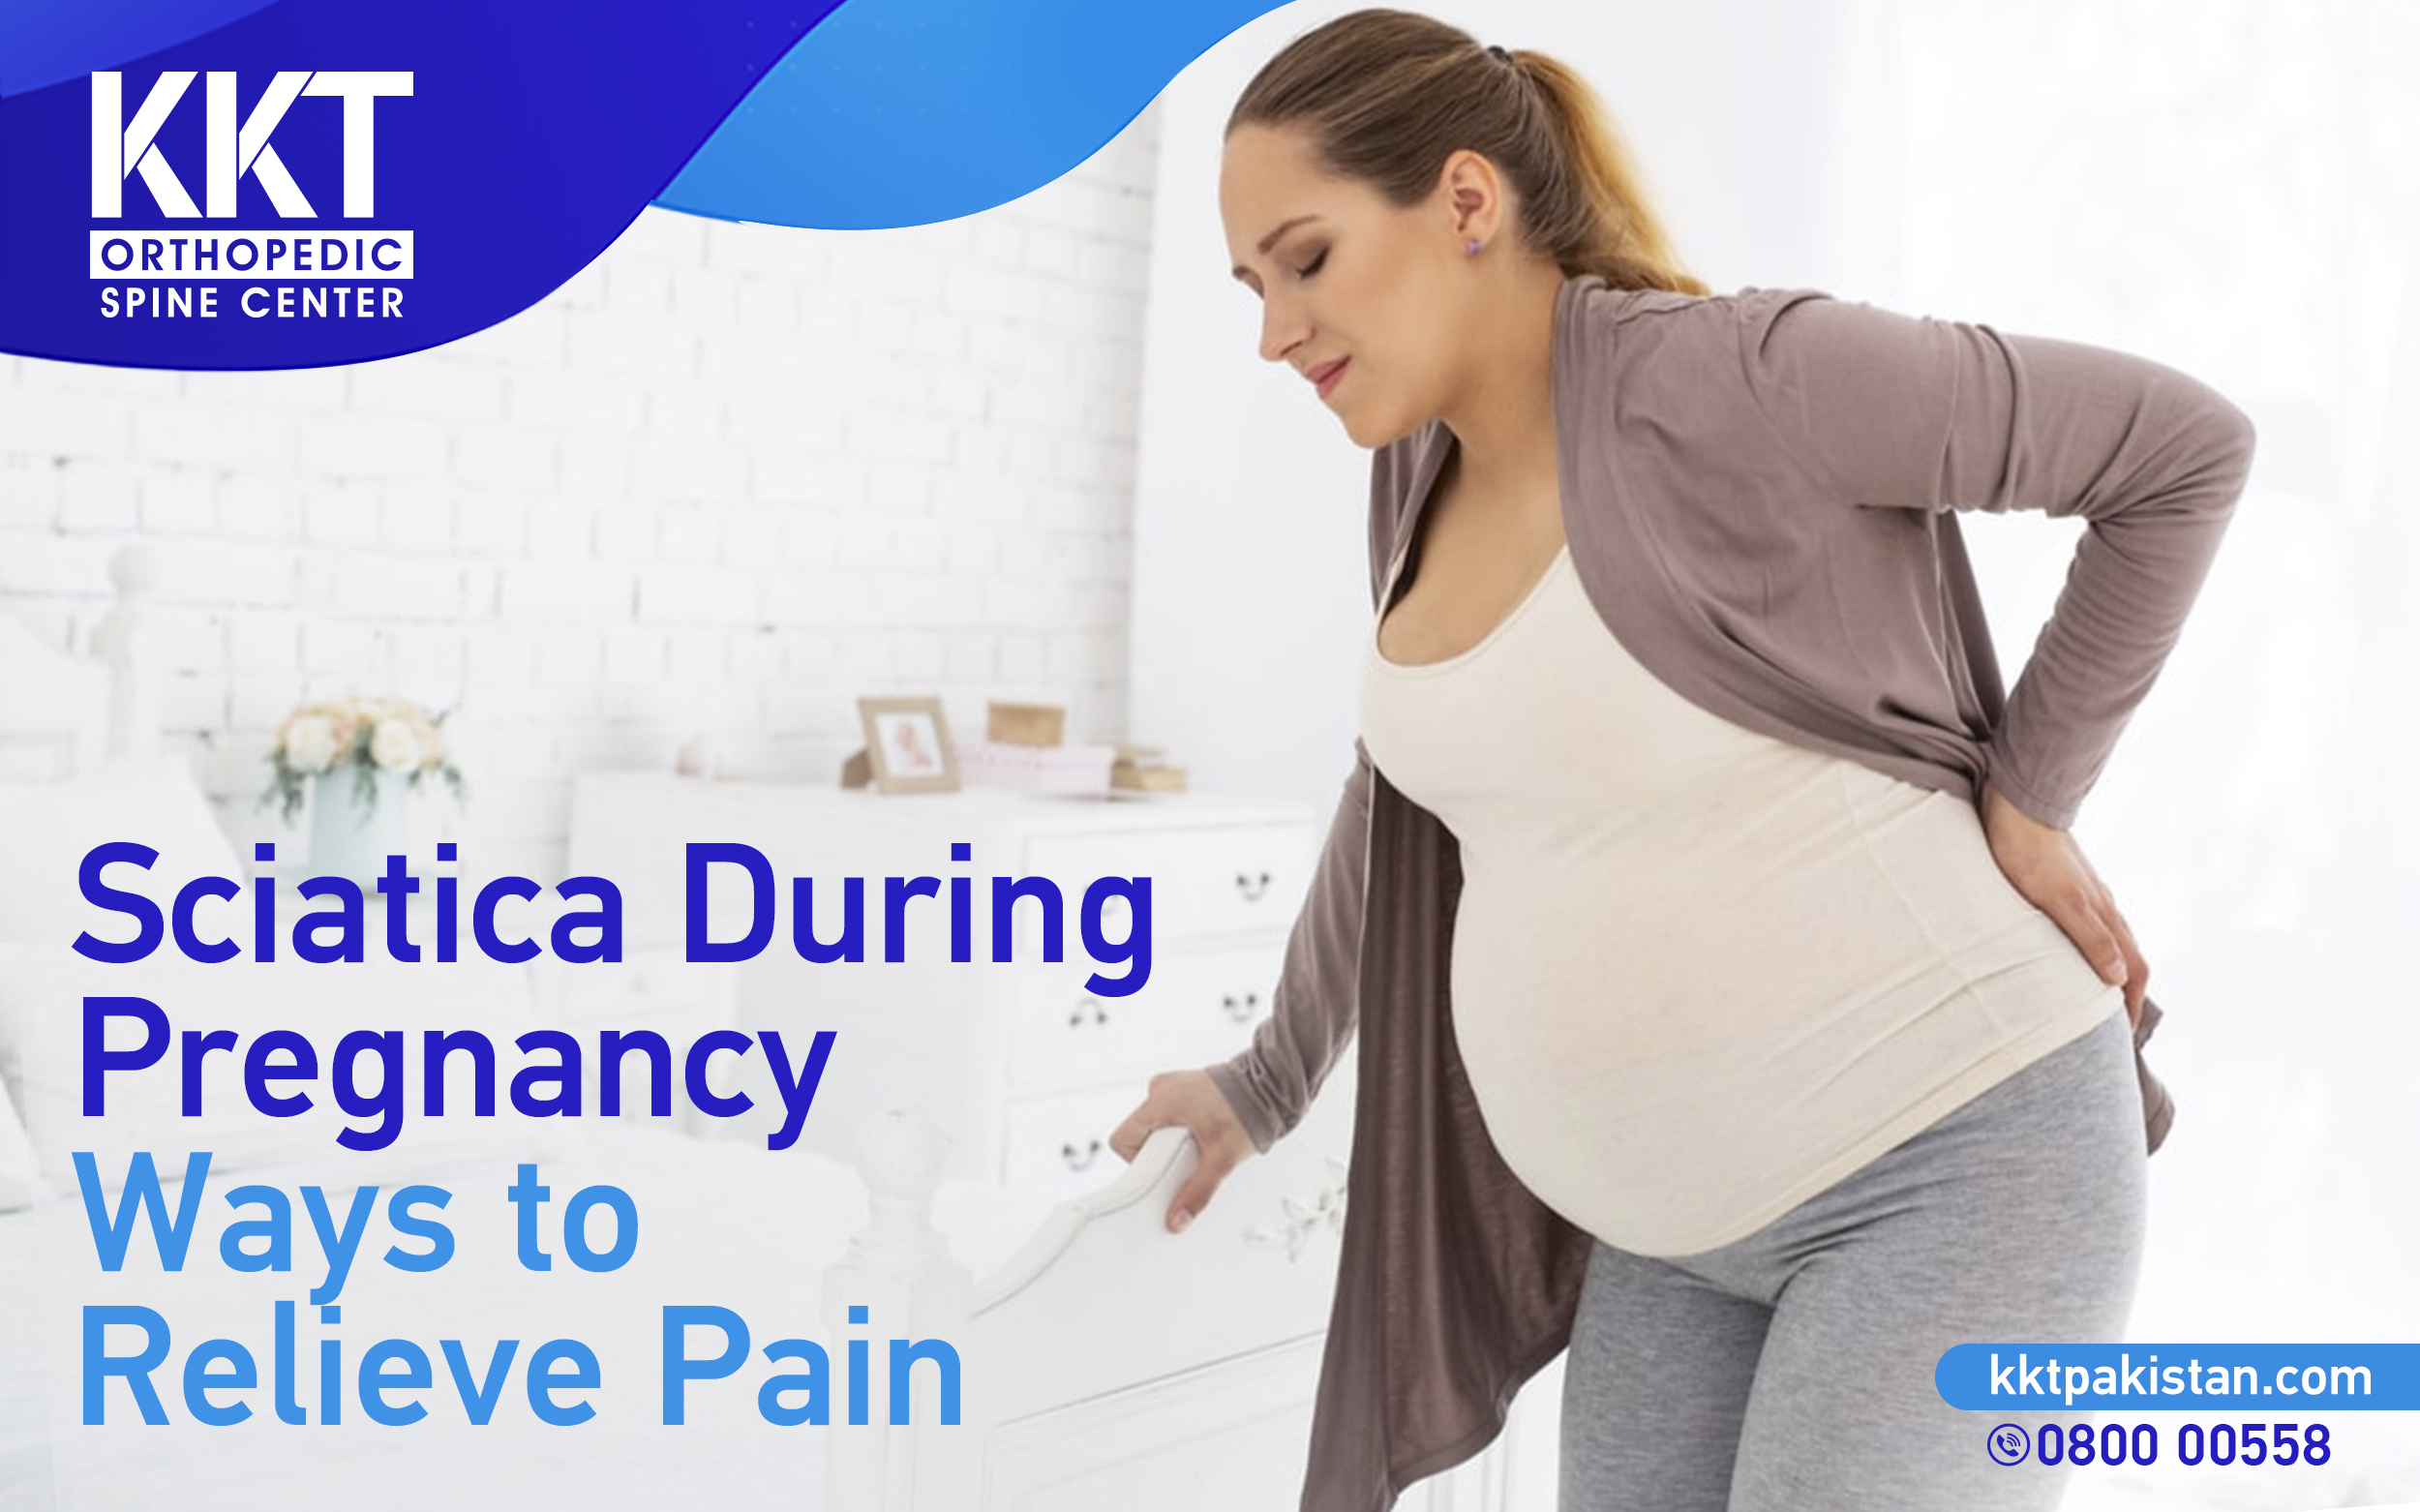 How to Ease Sciatic Nerve Pain During Pregnancy